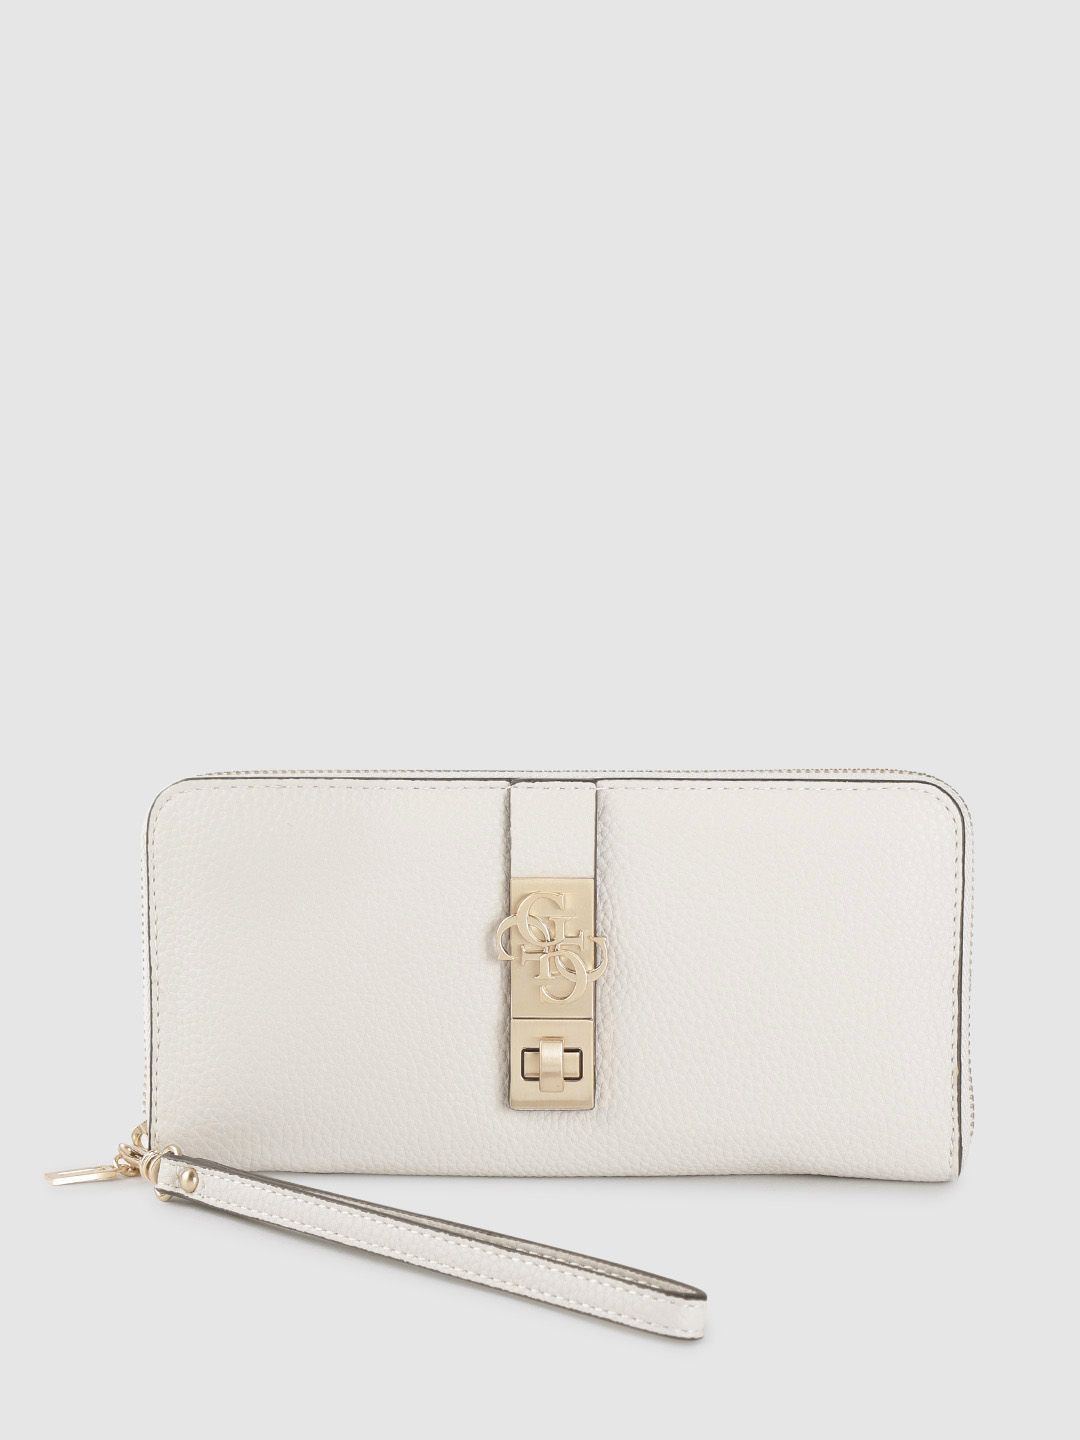 GUESS Women Off-White Solid Zip Around Wallet with Wrist Loop Price in India